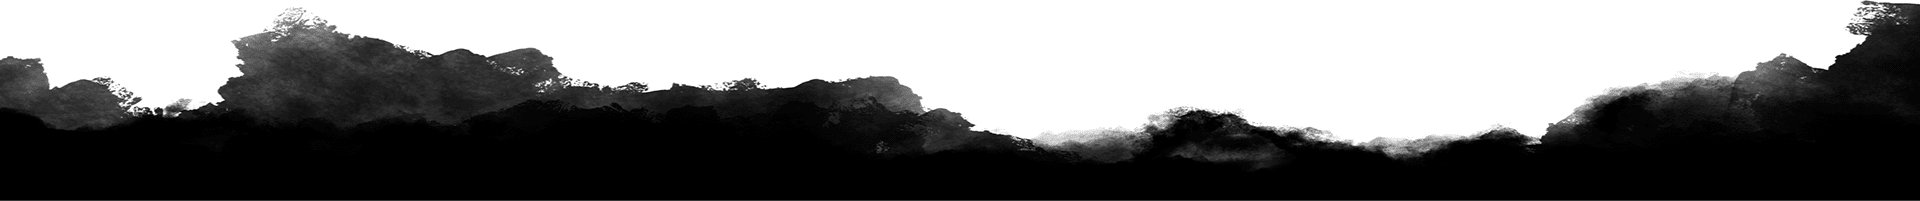 A black and green background with a mountain